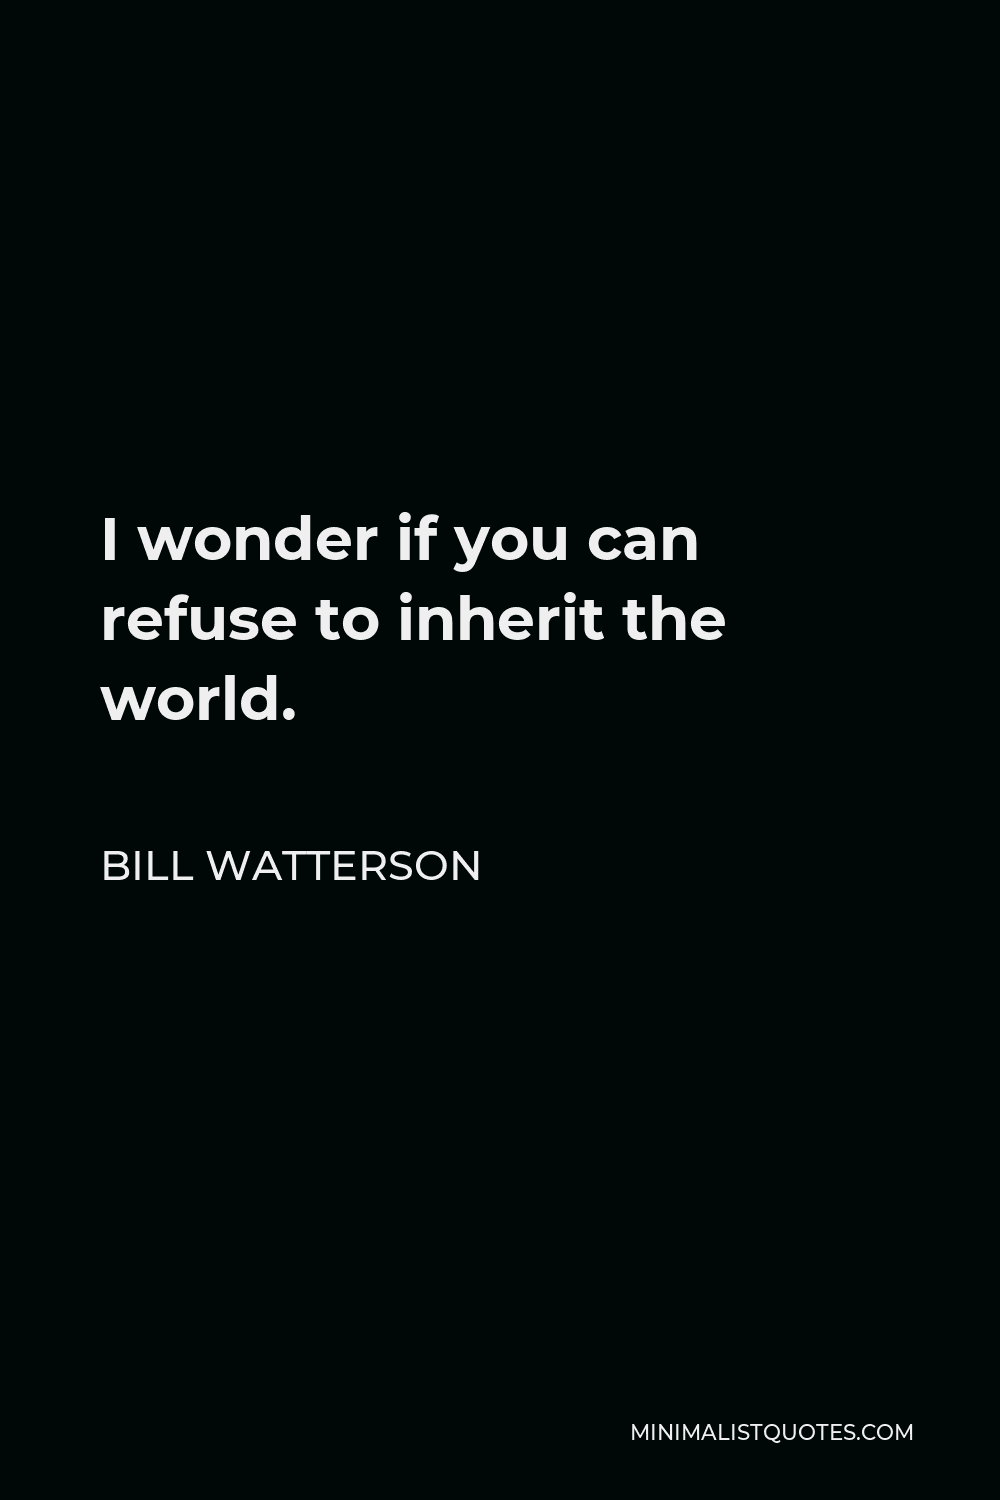 Bill Watterson Quote - I wonder if you can refuse to inherit the world.